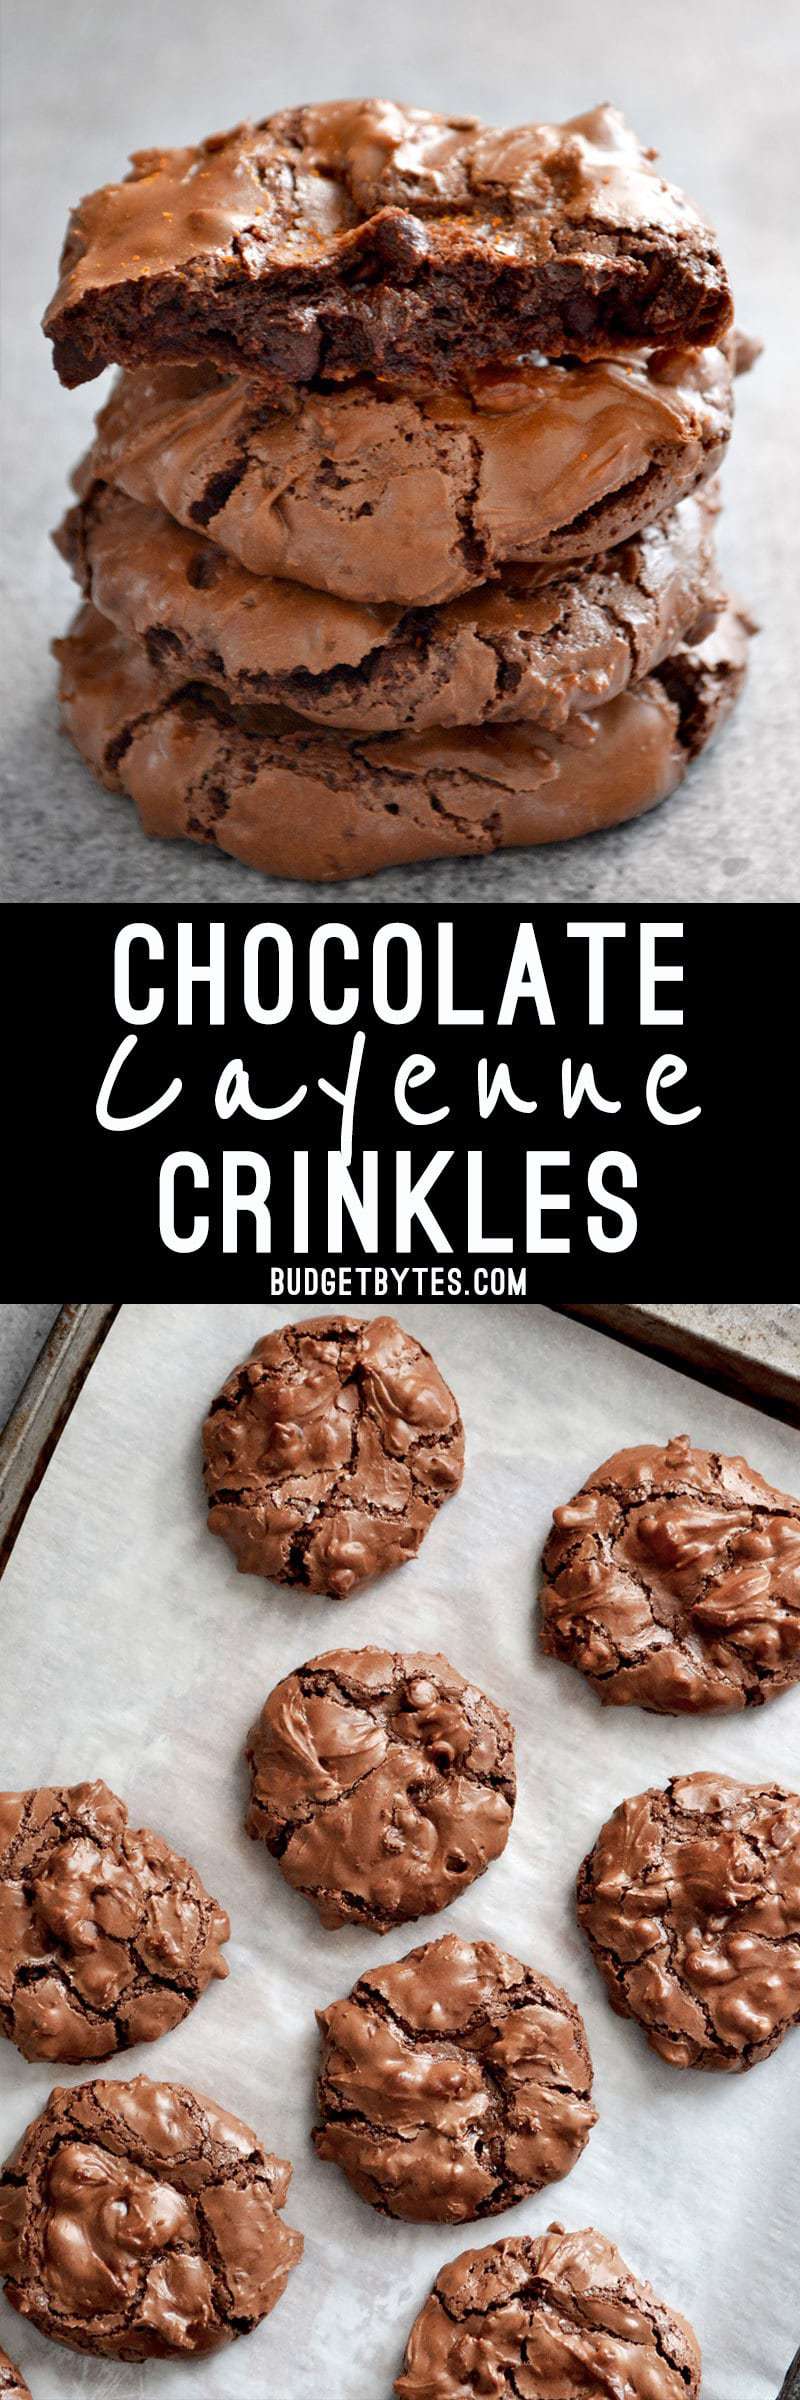 These flourless Chocolate Cayenne Crinkles have a delicate, crispy exterior, rich chewy interior, and a spicy kick of cayenne. BudgetBytes.com